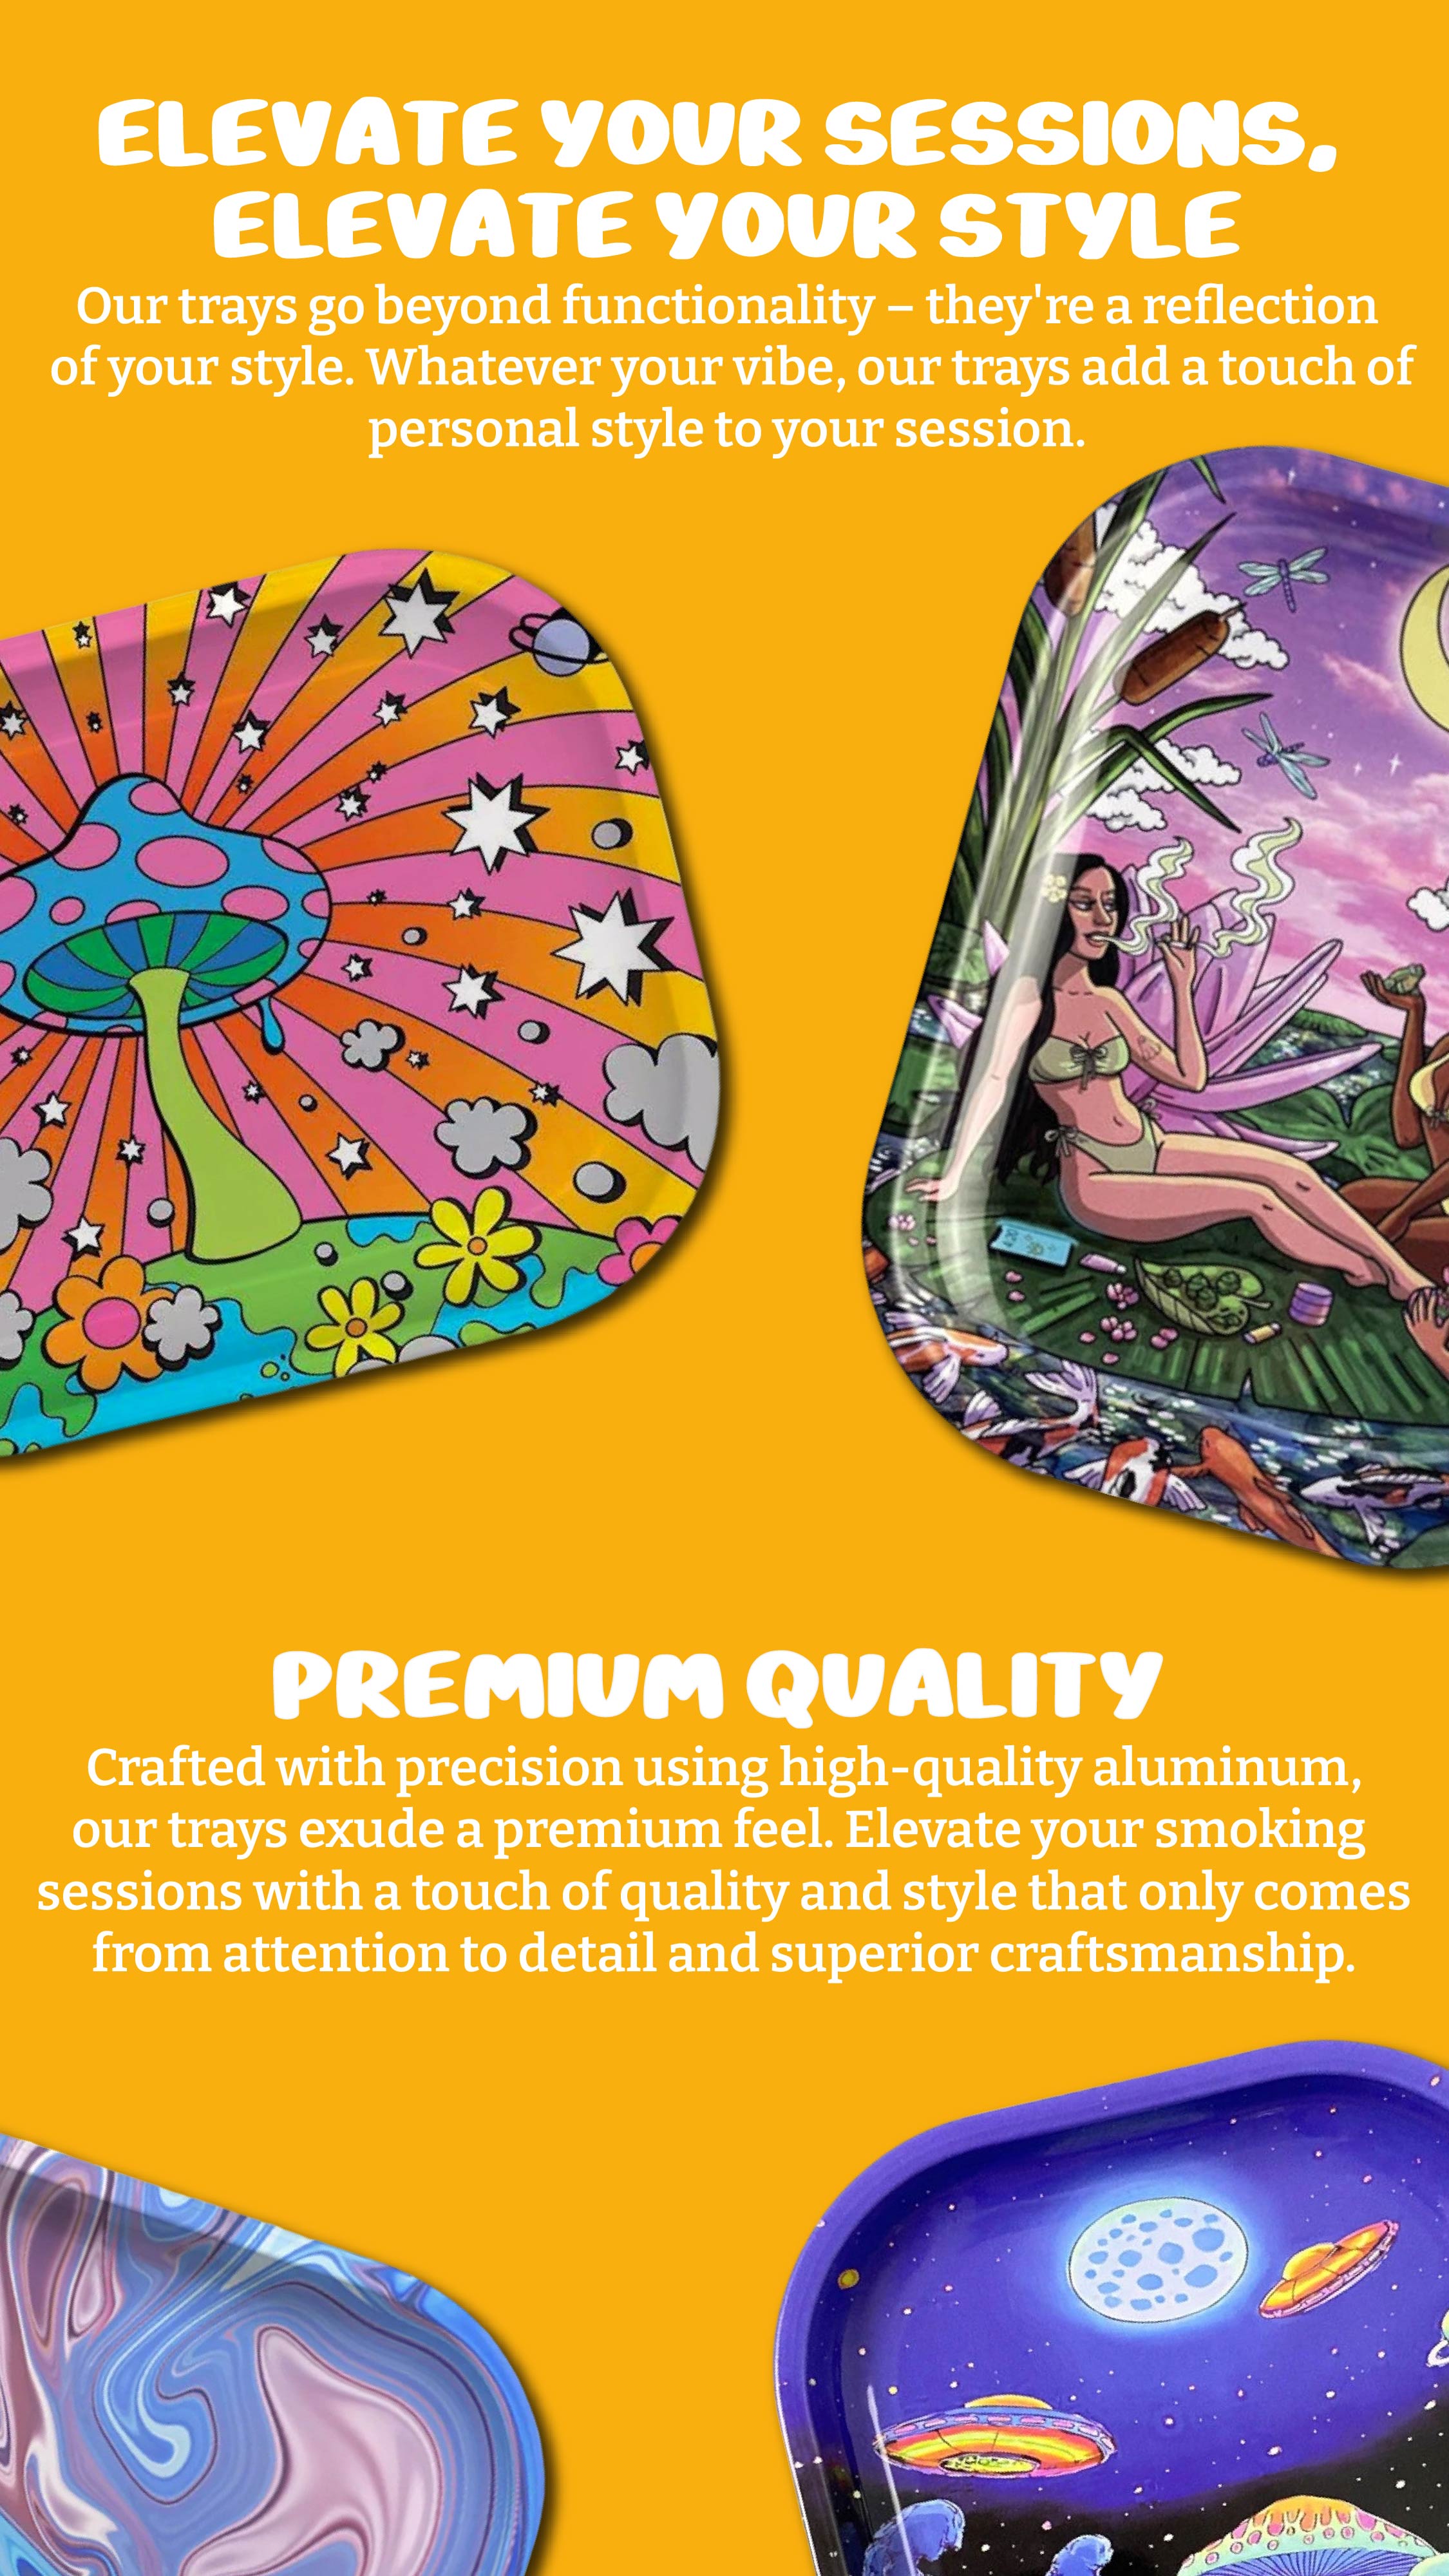 Elevate your sessions, elevate your style - Premium quality rolling trays